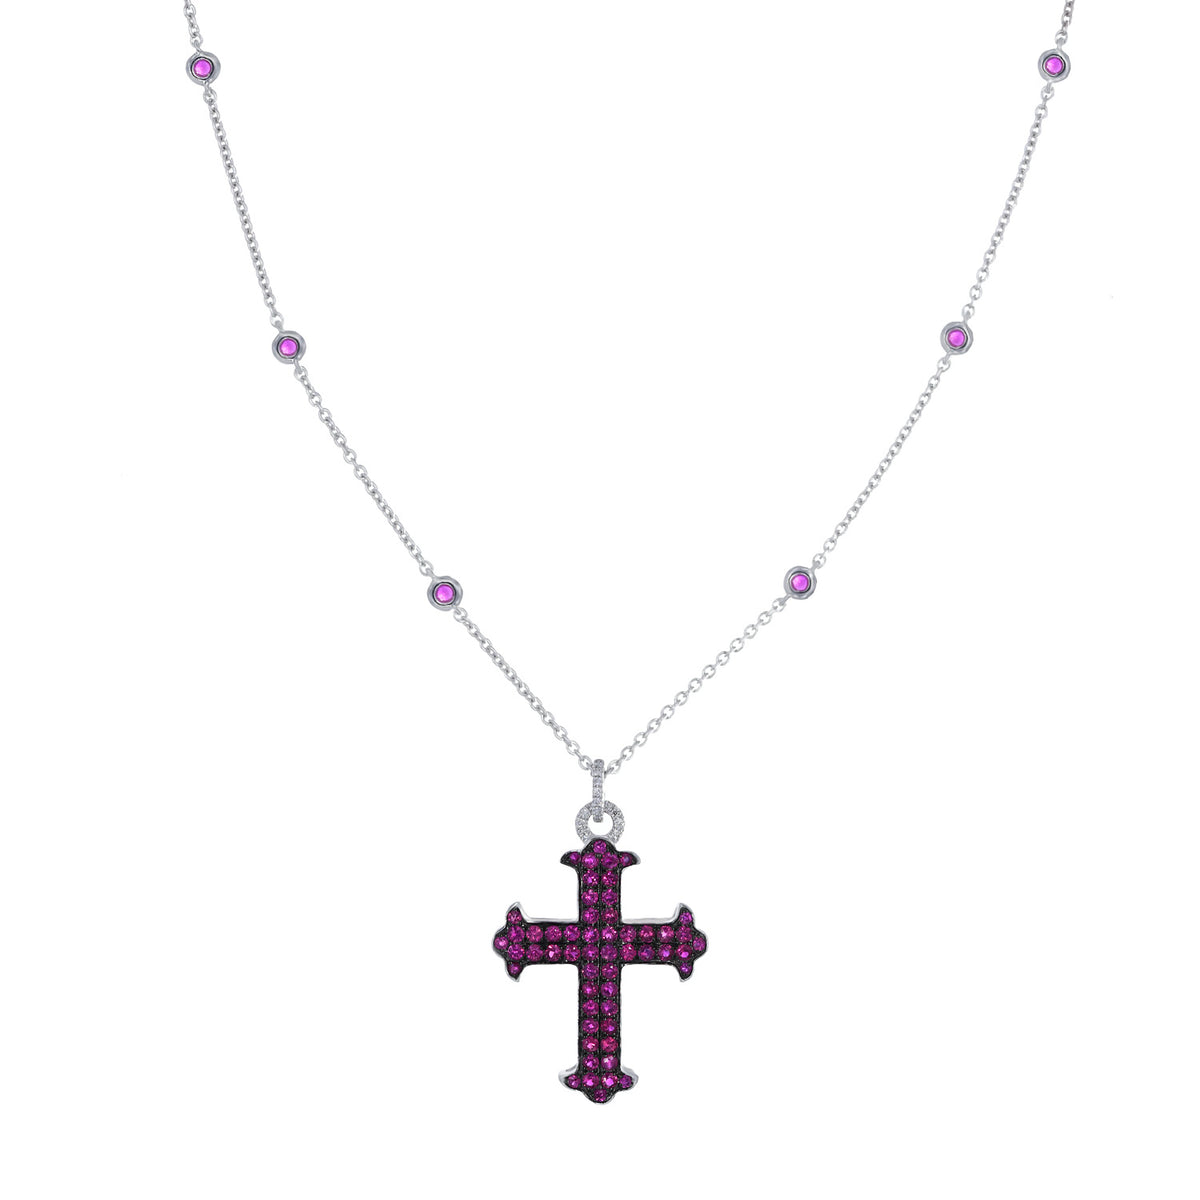 Ruby Cross Necklace. Red Cross necklace